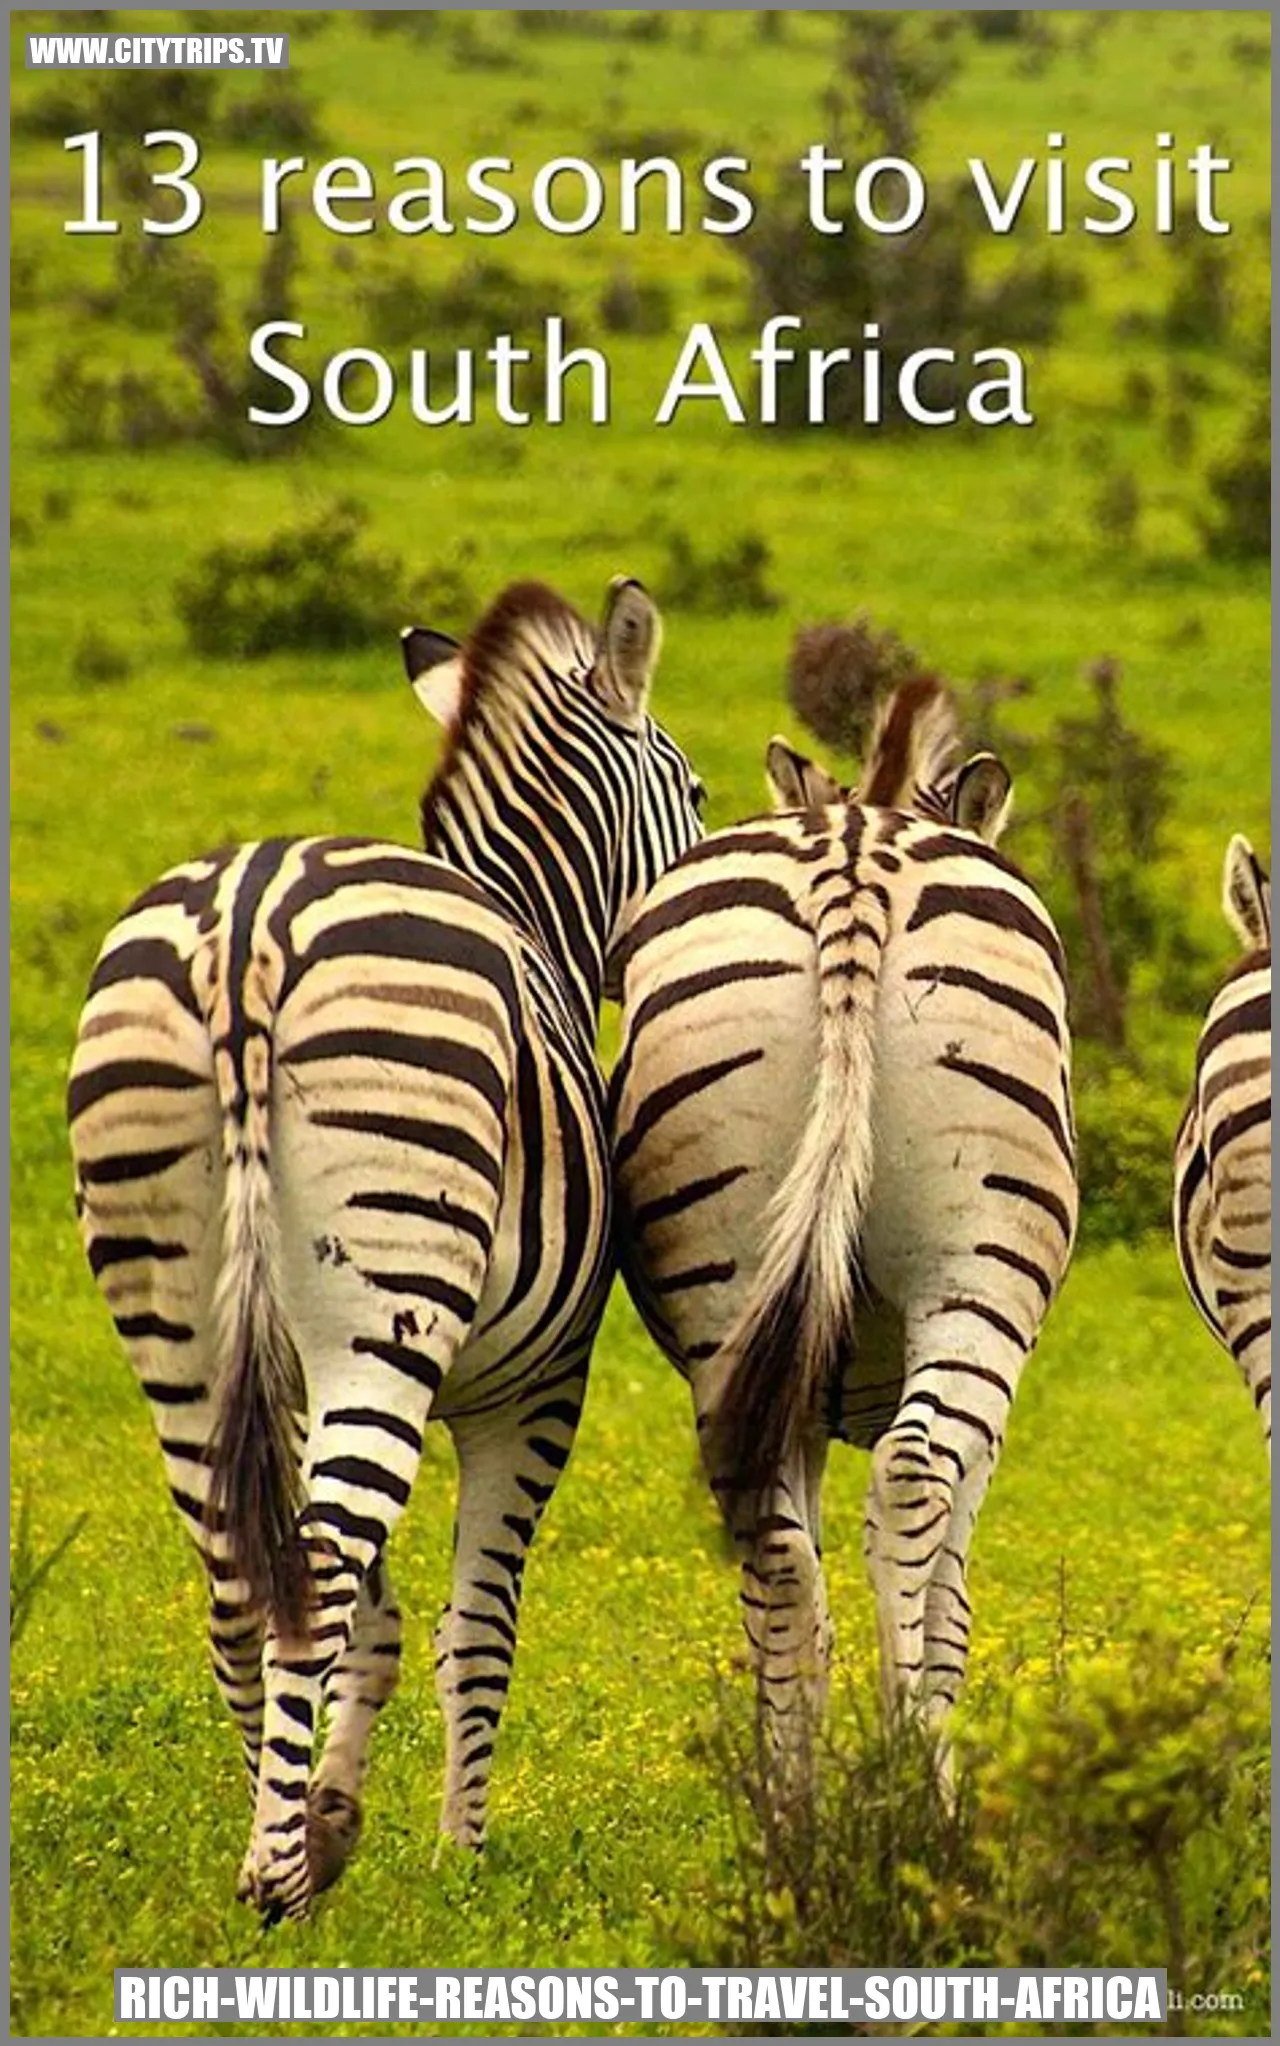 Rich Wildlife - Reasons to Travel South Africa